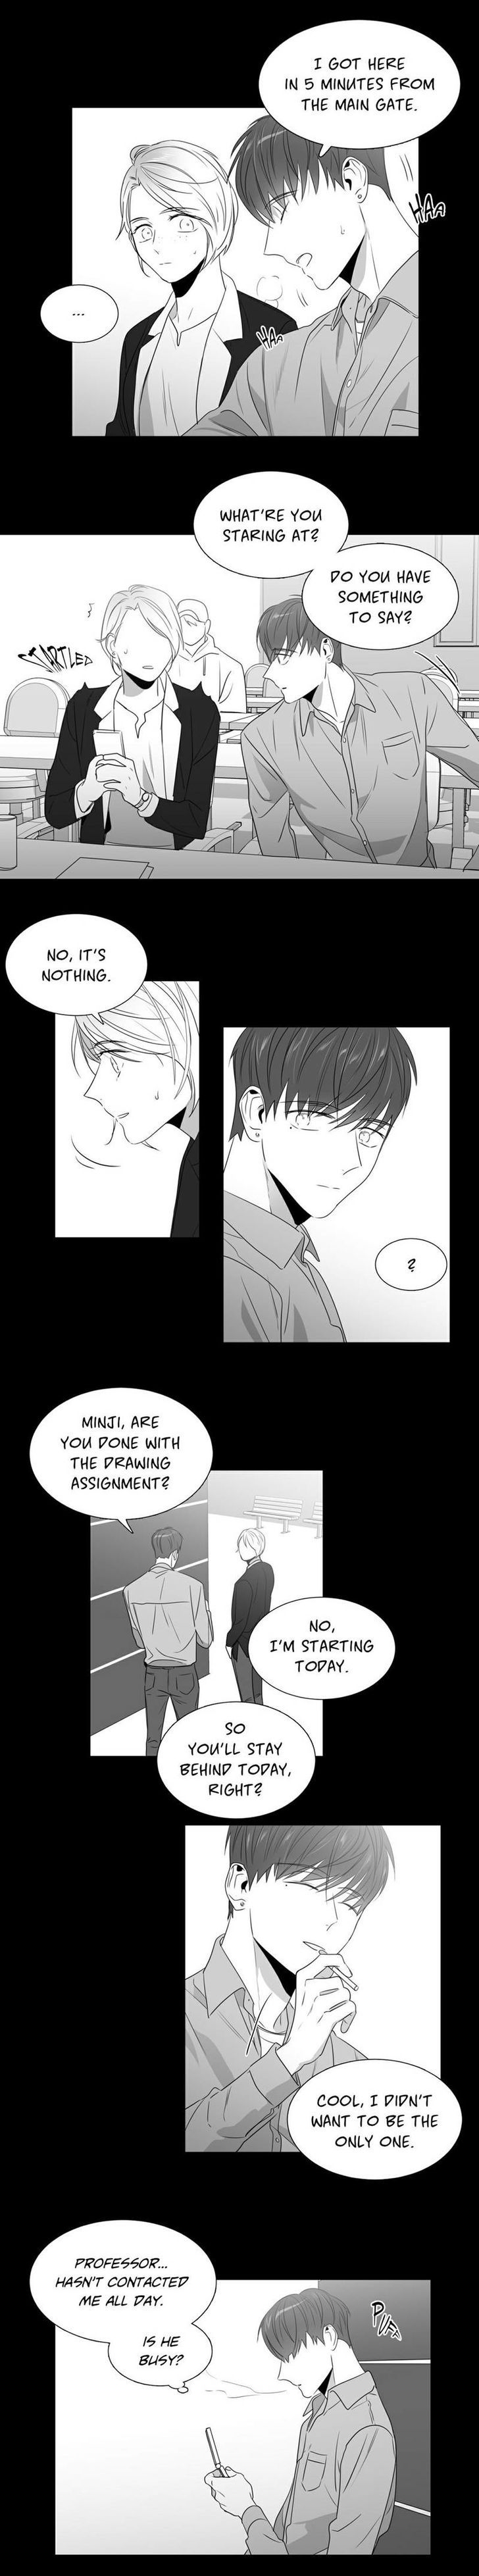 Lover Boy (Lezhin) Chapter 047.2 page 4